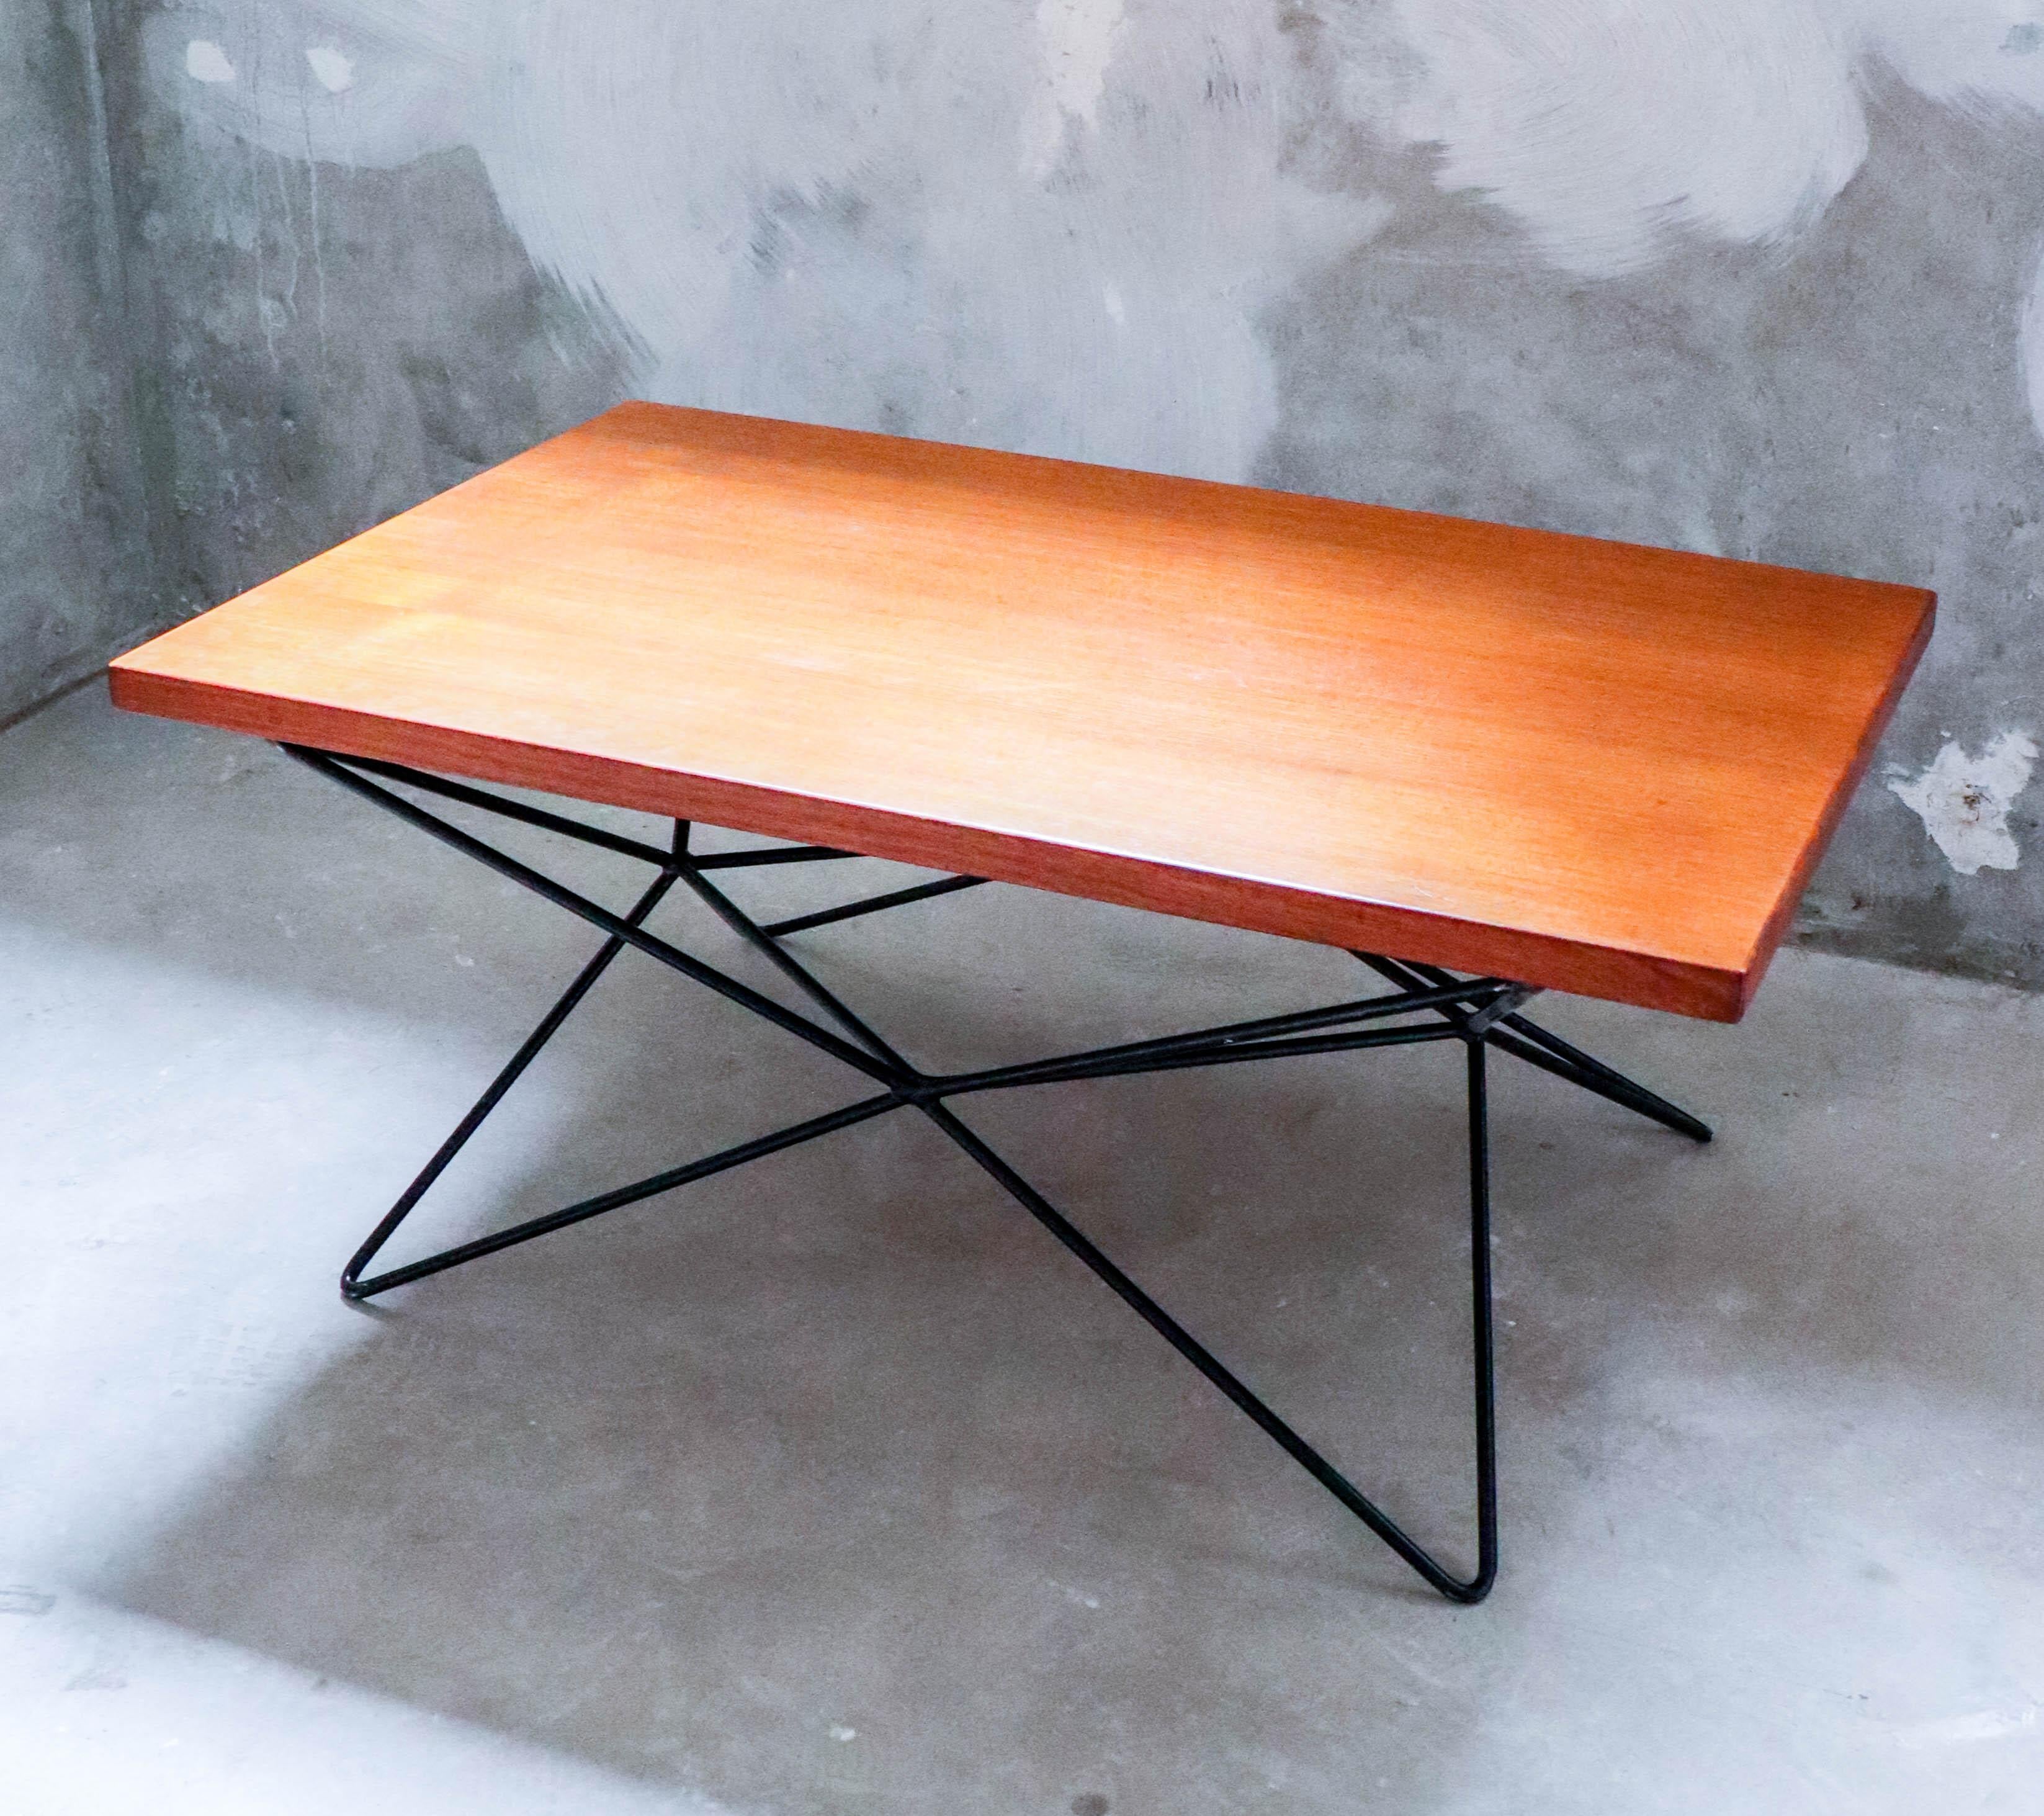 A beautiful A2-table designed by the Swedish architect and designer Bengt-Johan Gullberg. The table was designed to be both a coffee table, dinner table and a cocktail / side table depending on how you flip the base. It is designed in 1952, the base